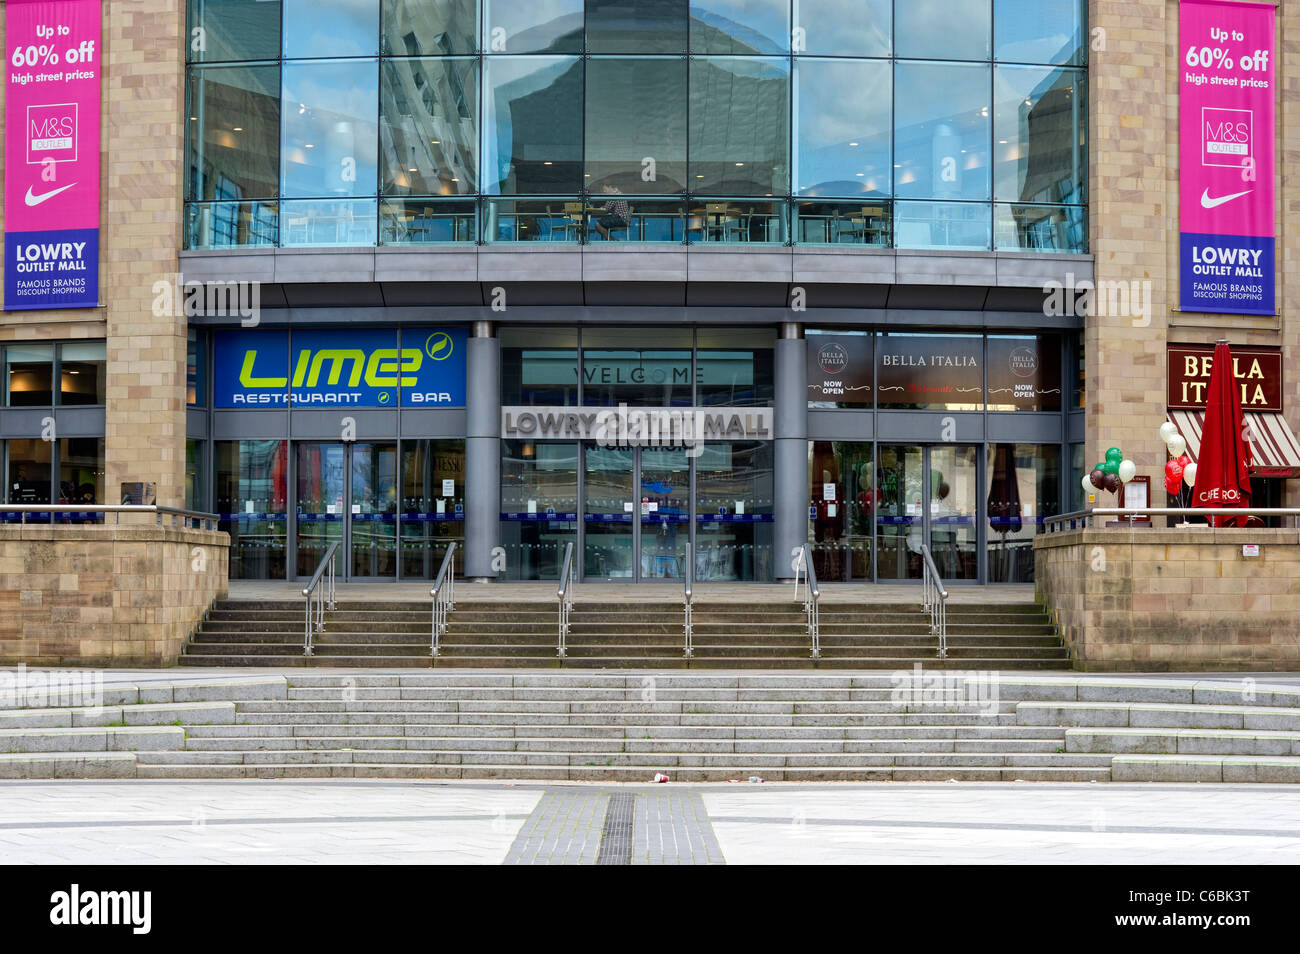 Entrance to the Lowry Outlet Mall in Salford Quays near Manchester, England Stock Photo